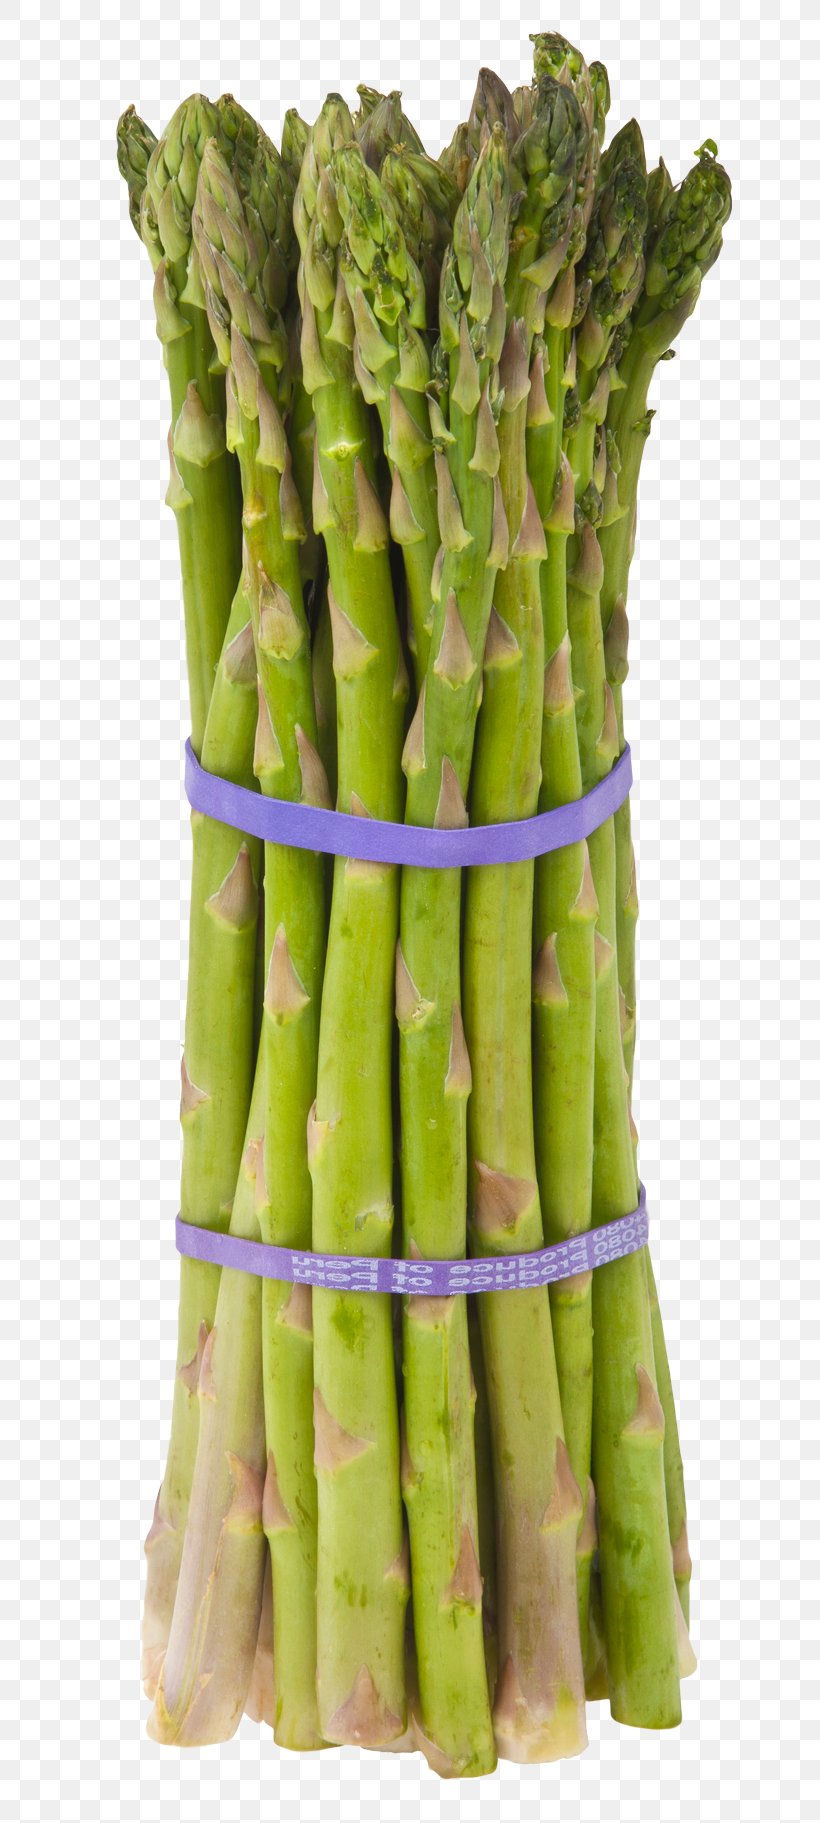 Cream Of Asparagus Soup Vegetable Cooking Eating, PNG, 718x1823px, Asparagus, Commodity, Cooking, Cream Of Asparagus Soup, Dish Download Free